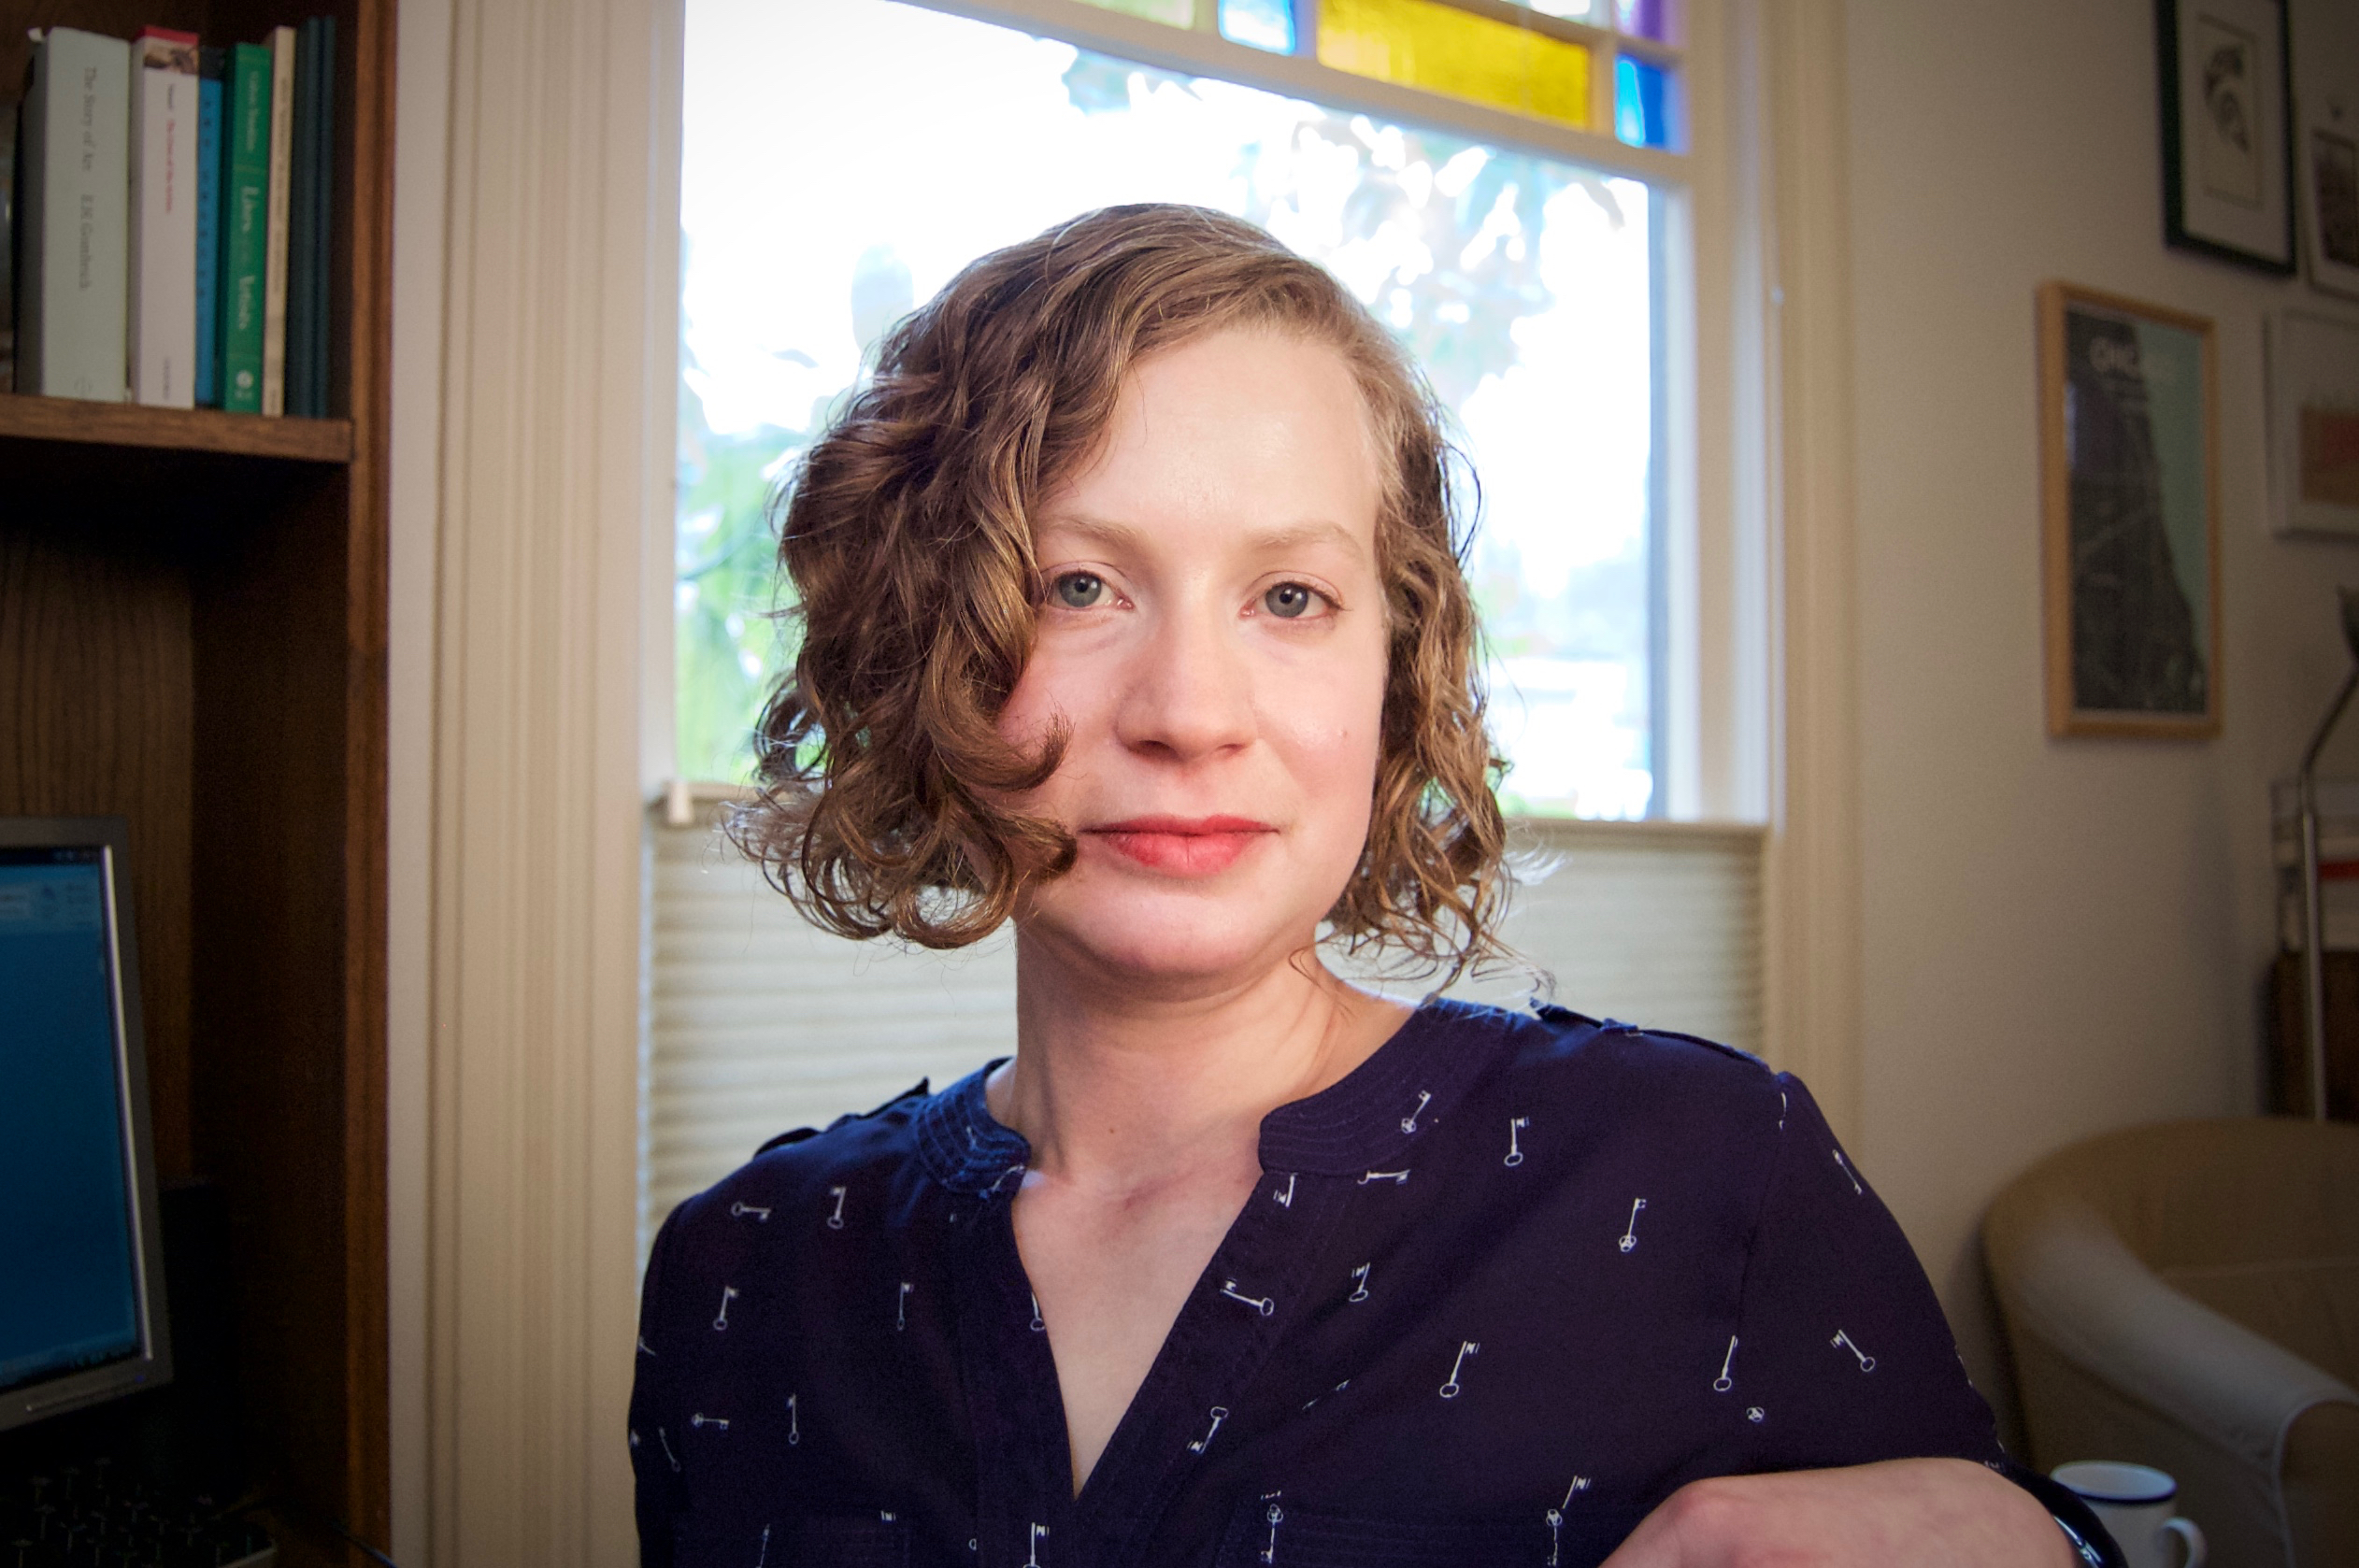 Author photo of Anca Szilagyi, who has a blond curly bob and blue eyes and is wearing a blue shirt.